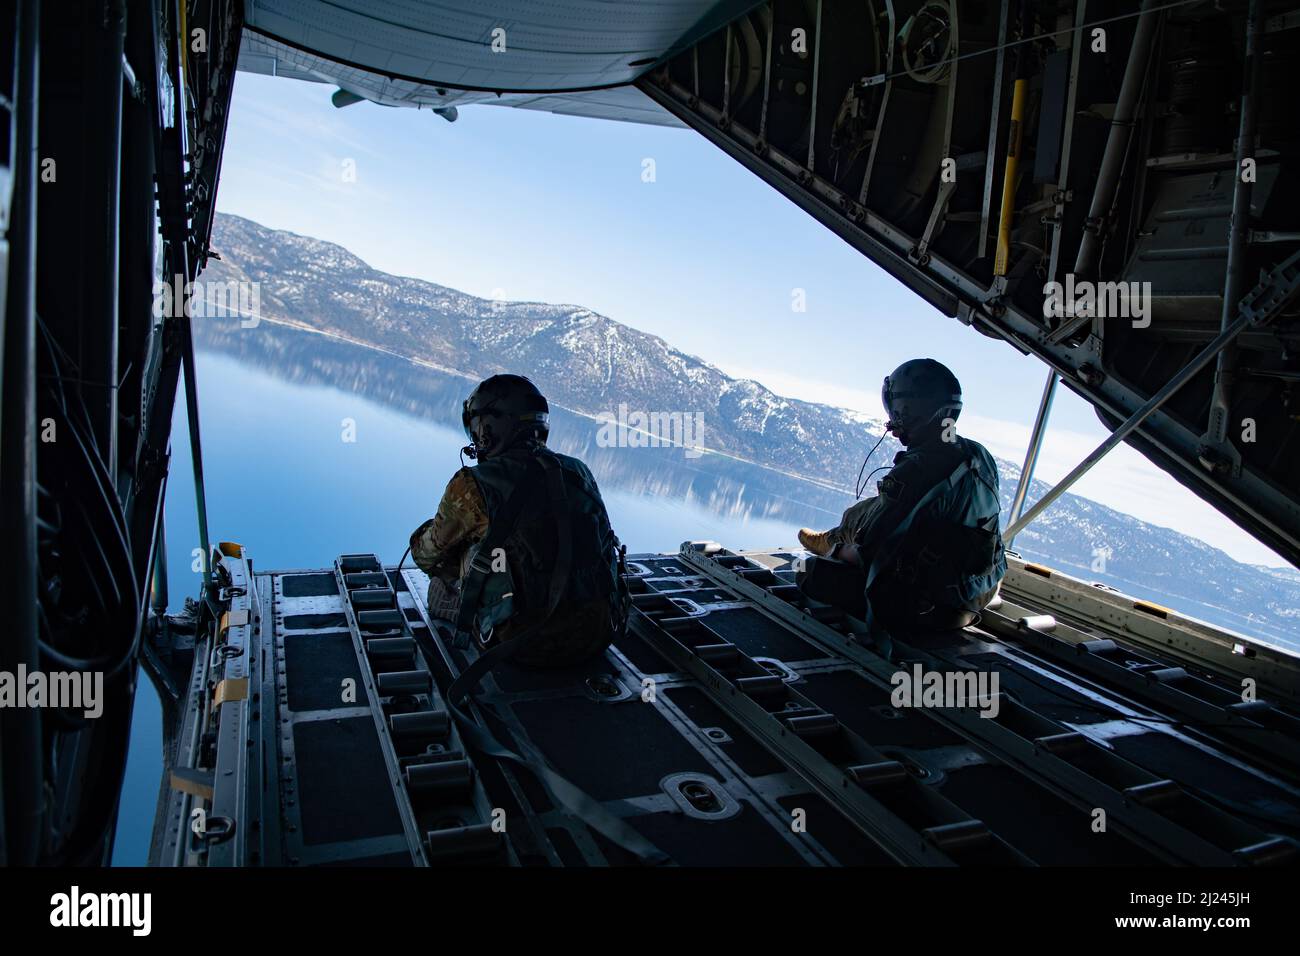 U.S. Air Force Staff Sgt. Sydney Goddard (left) and Airman First Class Jaylin Ford (right), Nevada Air National Guard loadmasters, sit on the ramp of a C-130 Hercules over Lake Tahoe during a civic leader orientation flight, March 25, 2022. Local civic leaders were brought on an orientation flight to increase their awareness about the Nevada Air National Guard and to help them better understand the missions that the Airmen execute on a daily basis. (U.S. Air National Guard photo by Senior Airman Thomas Cox) Stock Photo